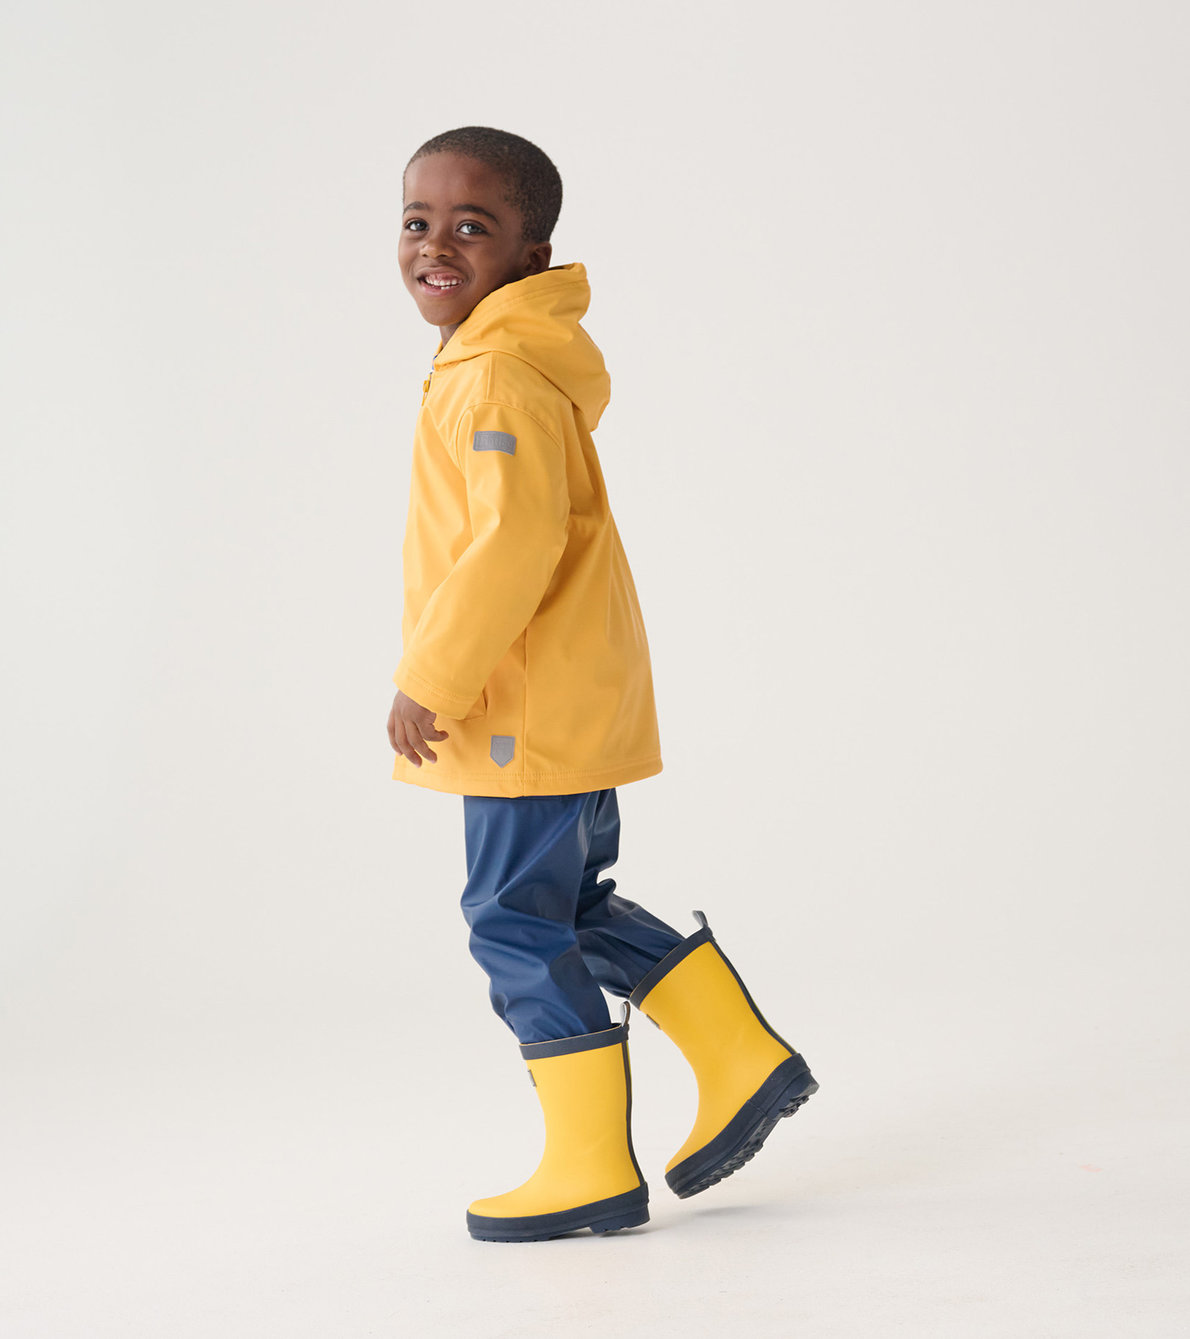 View larger image of Yellow with Navy Rain Kit